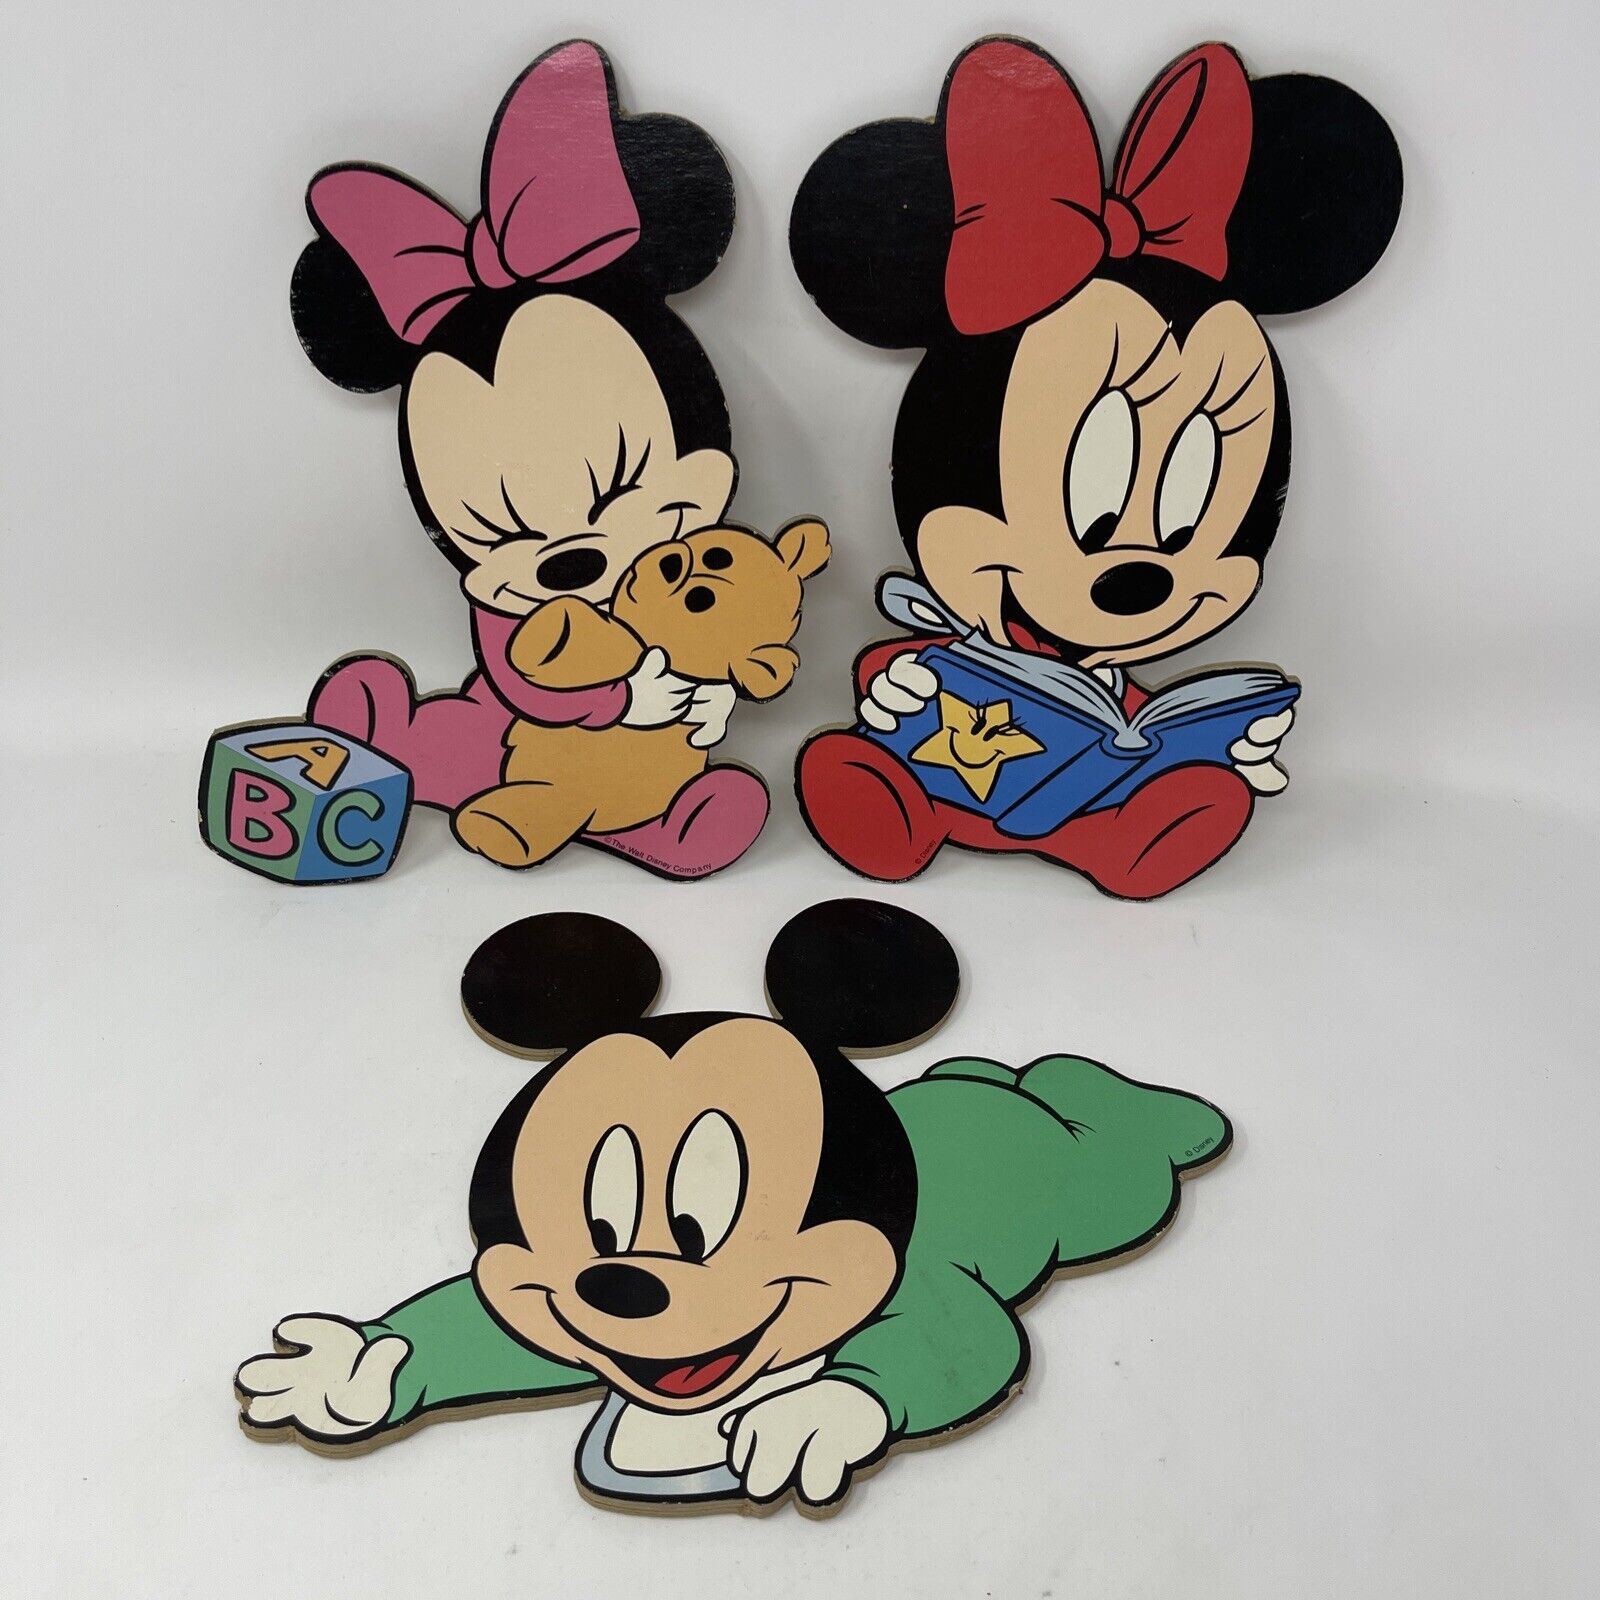 Vintage Cardboard Wall Hangings Baby Mickey Mouse, Minnie Mouse Walt Disney